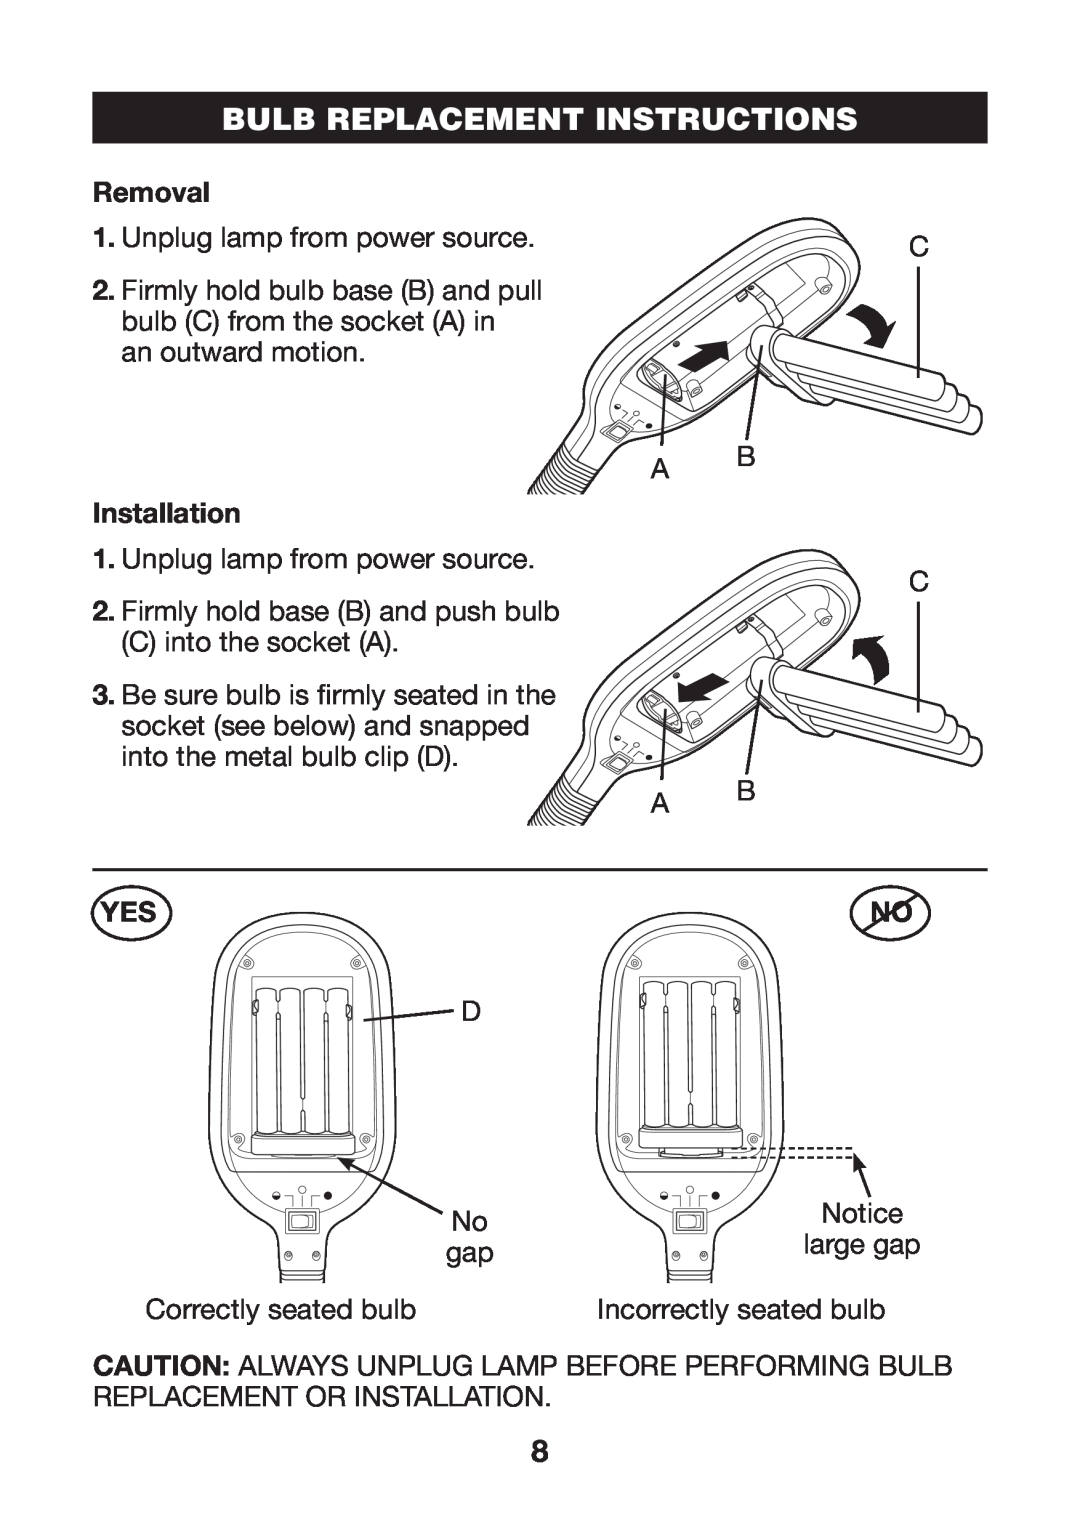 Verilux PL04 manual Bulb Replacement Instructions, Removal, Installation 